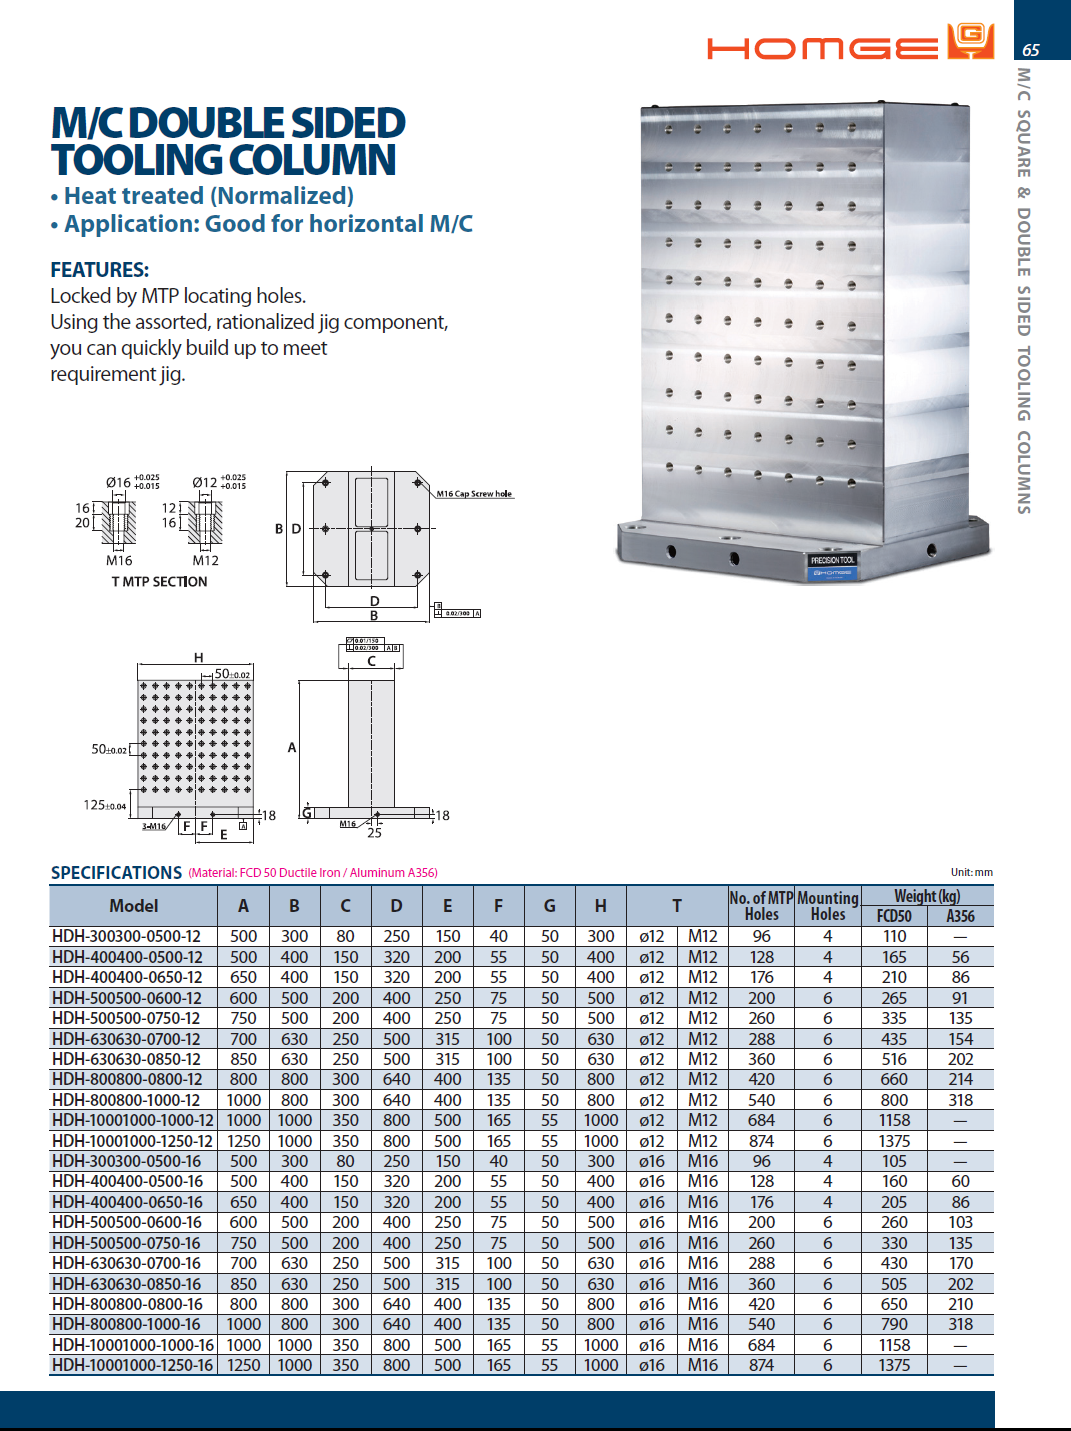 Catalog|M/C DOUBLE SIDED TOOLING COLUMN - CNC TOMBSTONE (HDH-)